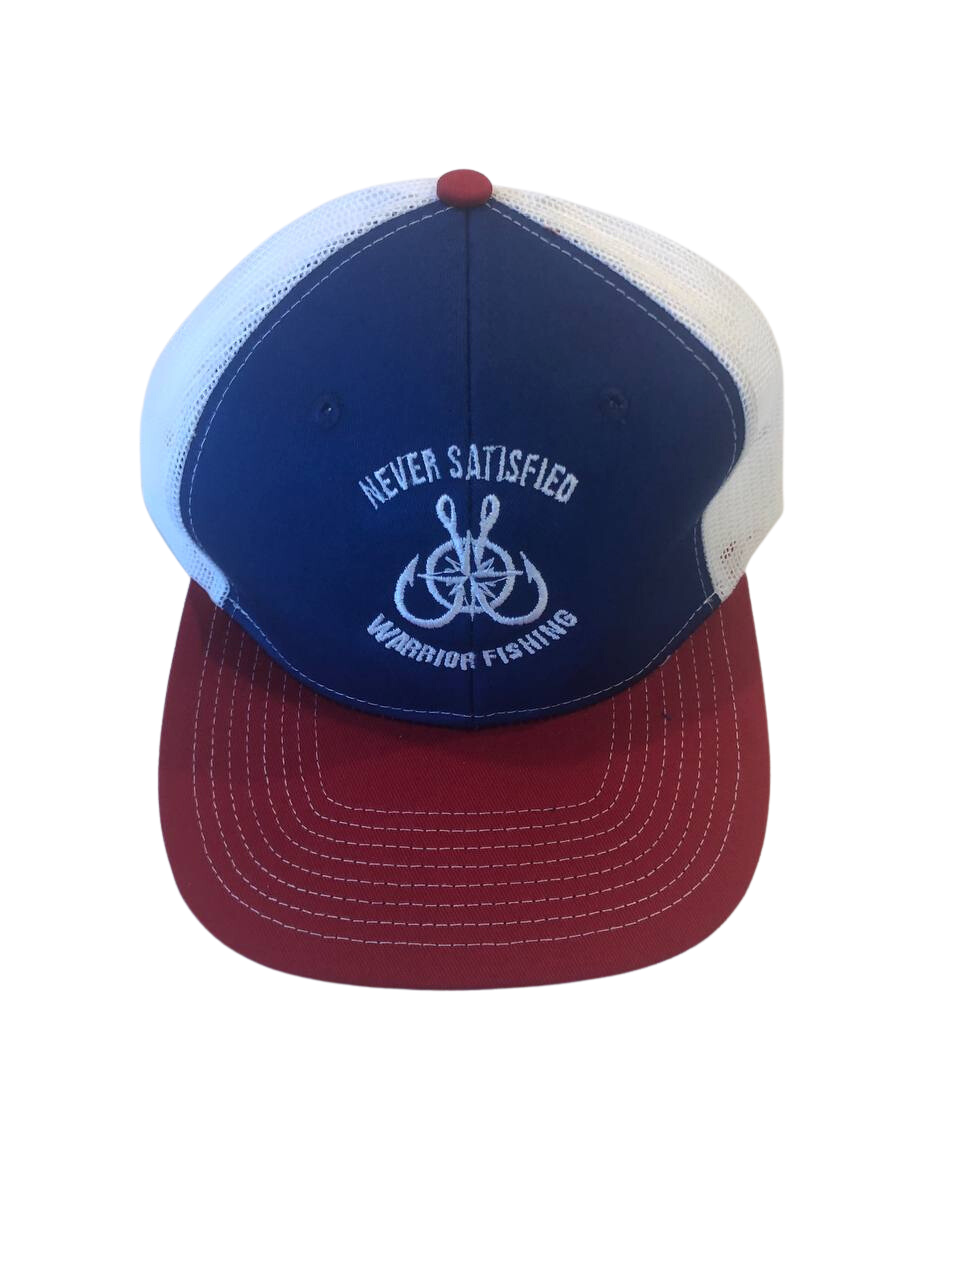 Never Satisfied Warrior Fishing Hat (Red/White/Blue) – Never Satisfied  Outfitters